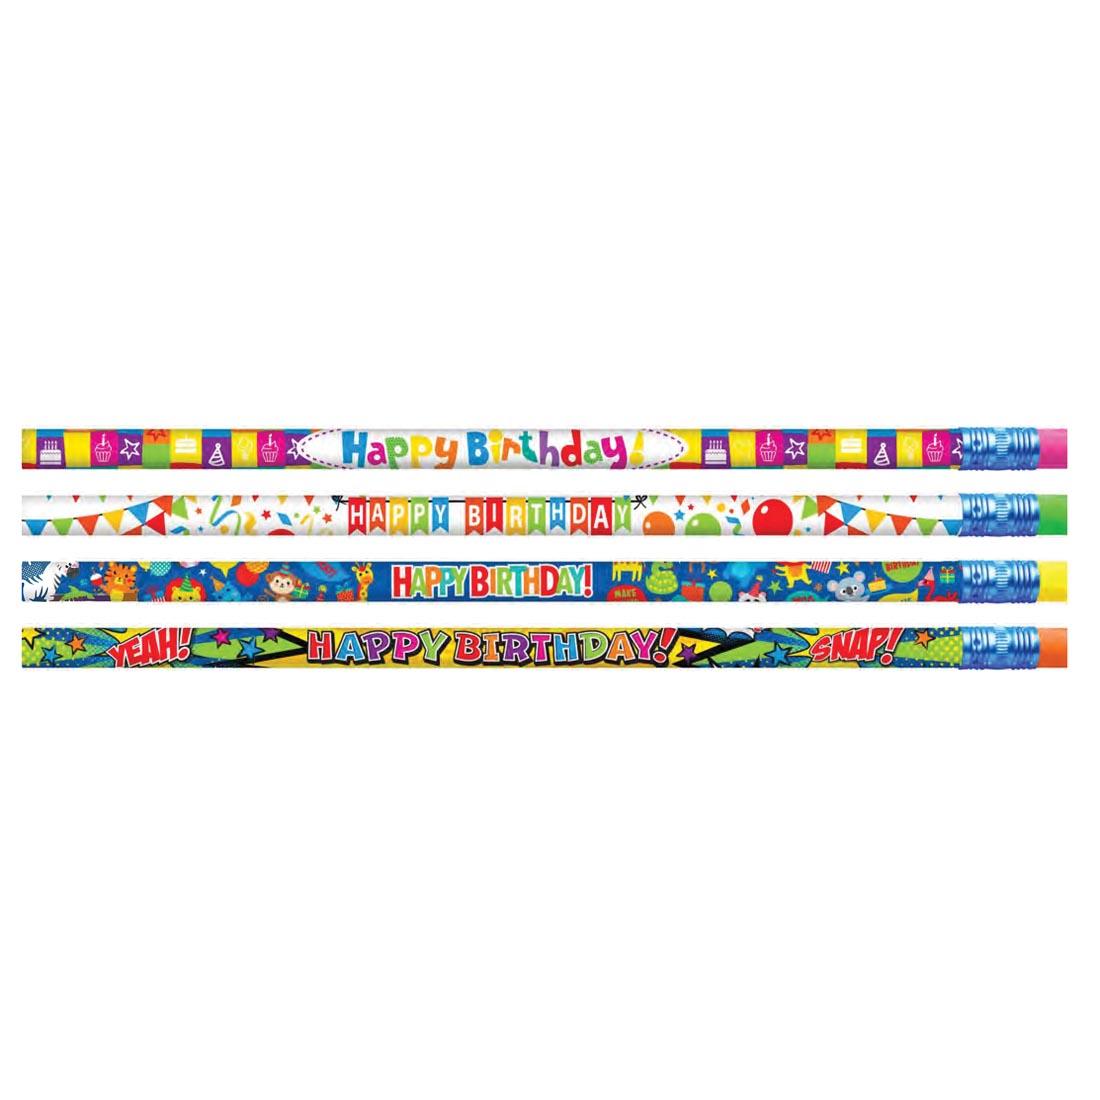 4 pencils show the four styles of Happy Birthday To You Pencils